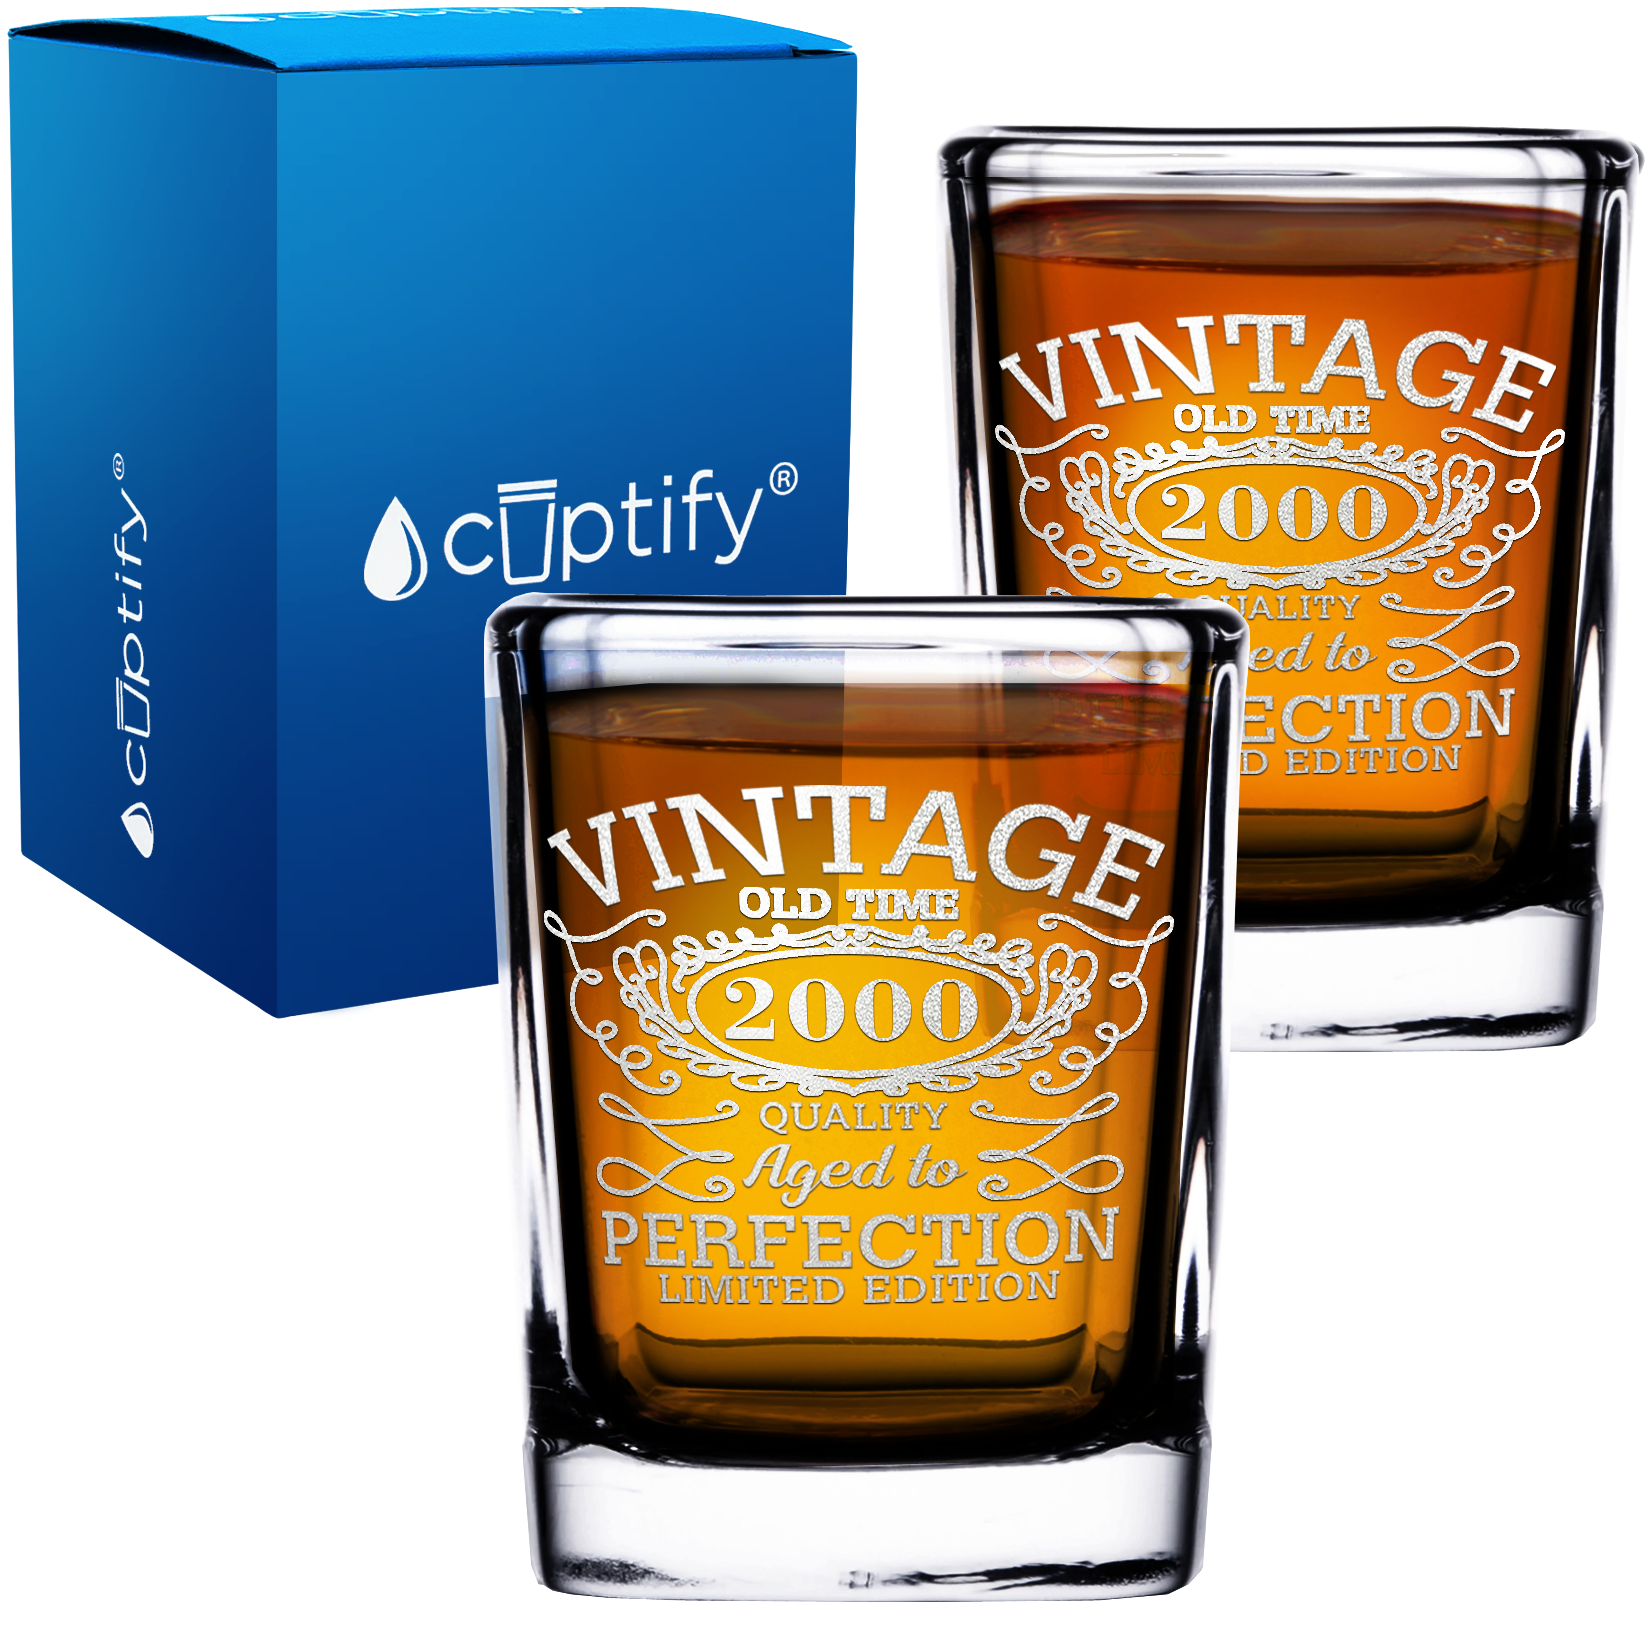 22nd Birthday Vintage 22 Years Old Time 2000 Quality 2oz Square Shot Glasses - Set of 2